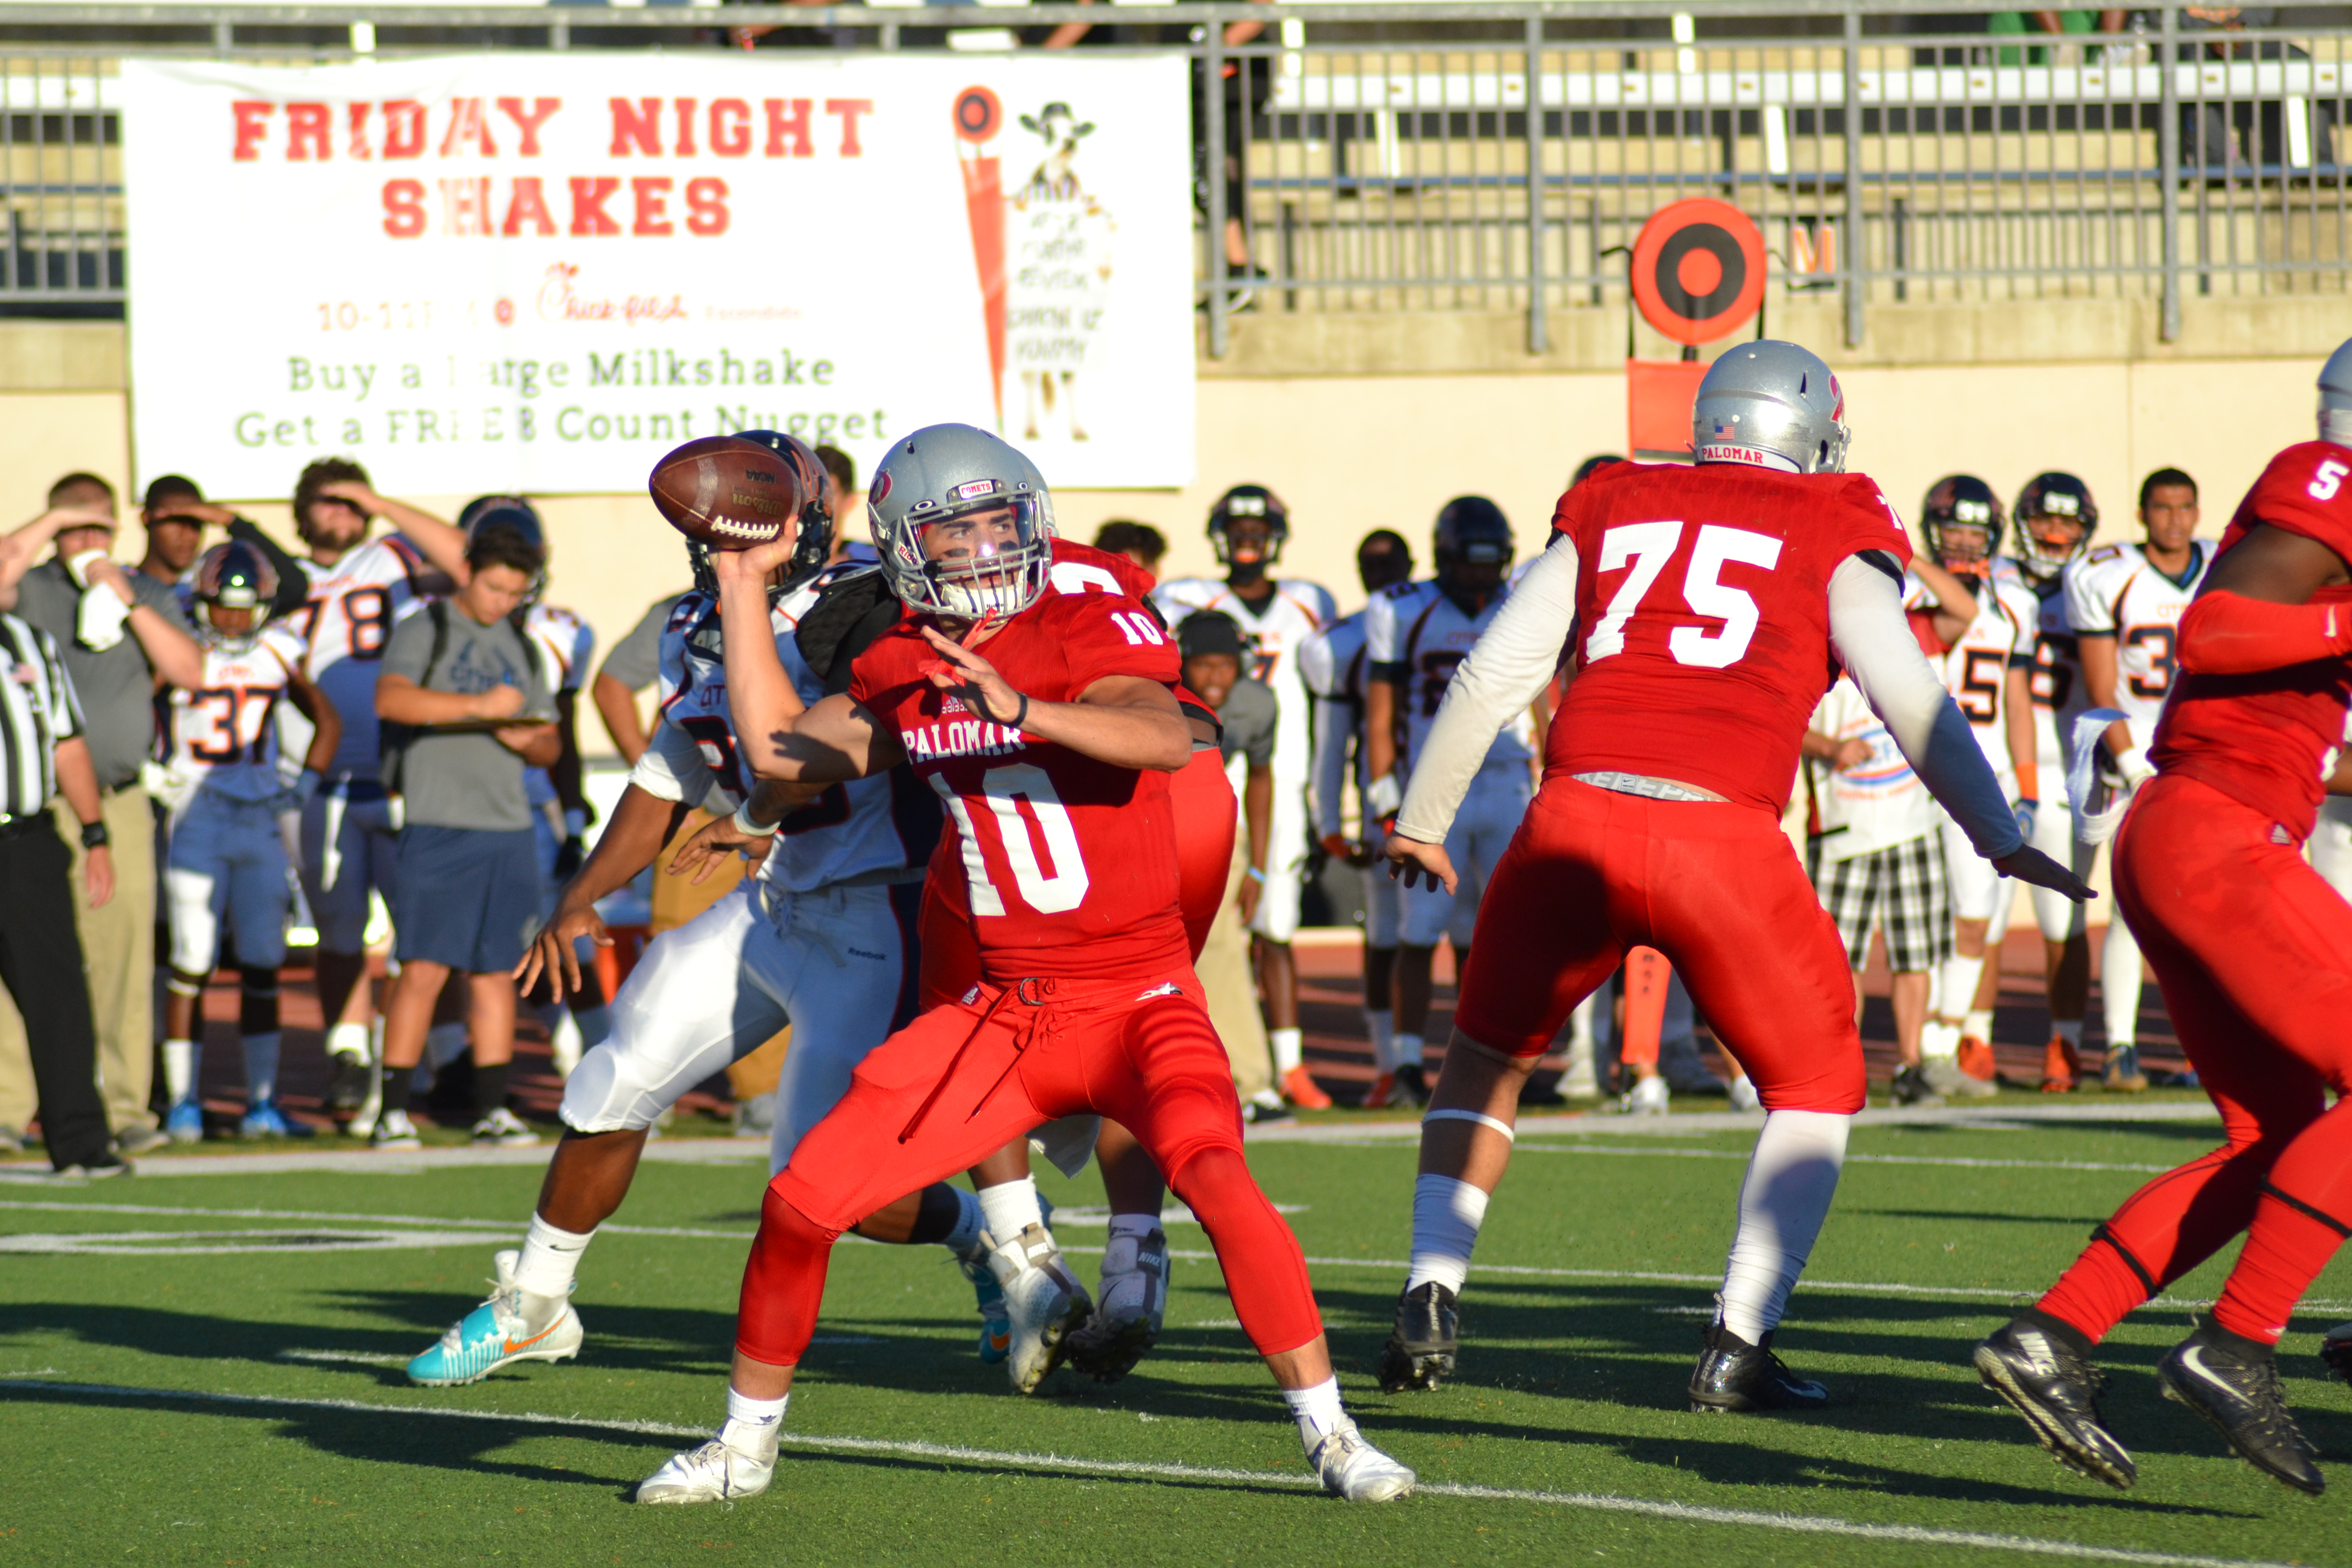 A Palomar football player in a red uniform and gray helmet brings his right hand behind his head to throw a football as other players tacklet in the background. A group of players, coaches, and a referee stand in the background.